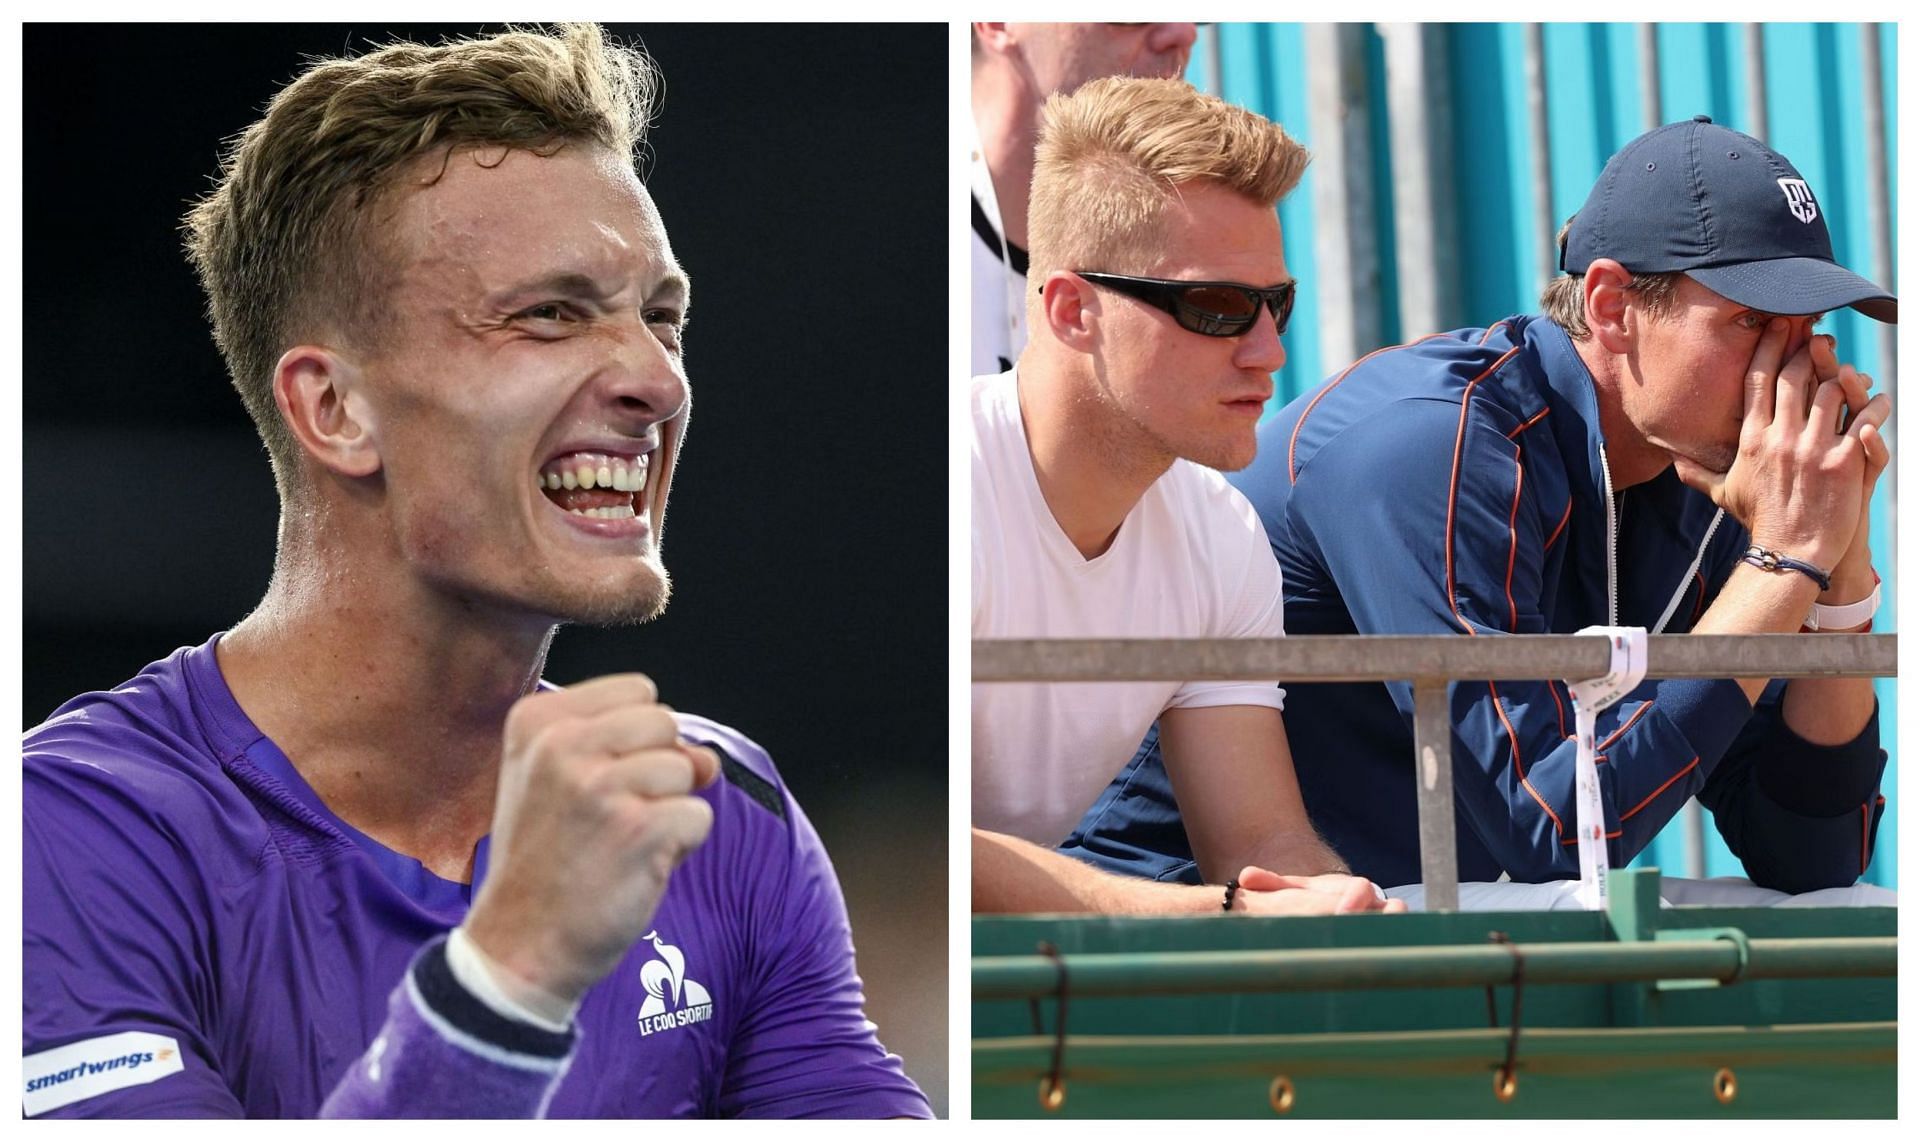 Lehecka lauded Berdych for helping him with his game